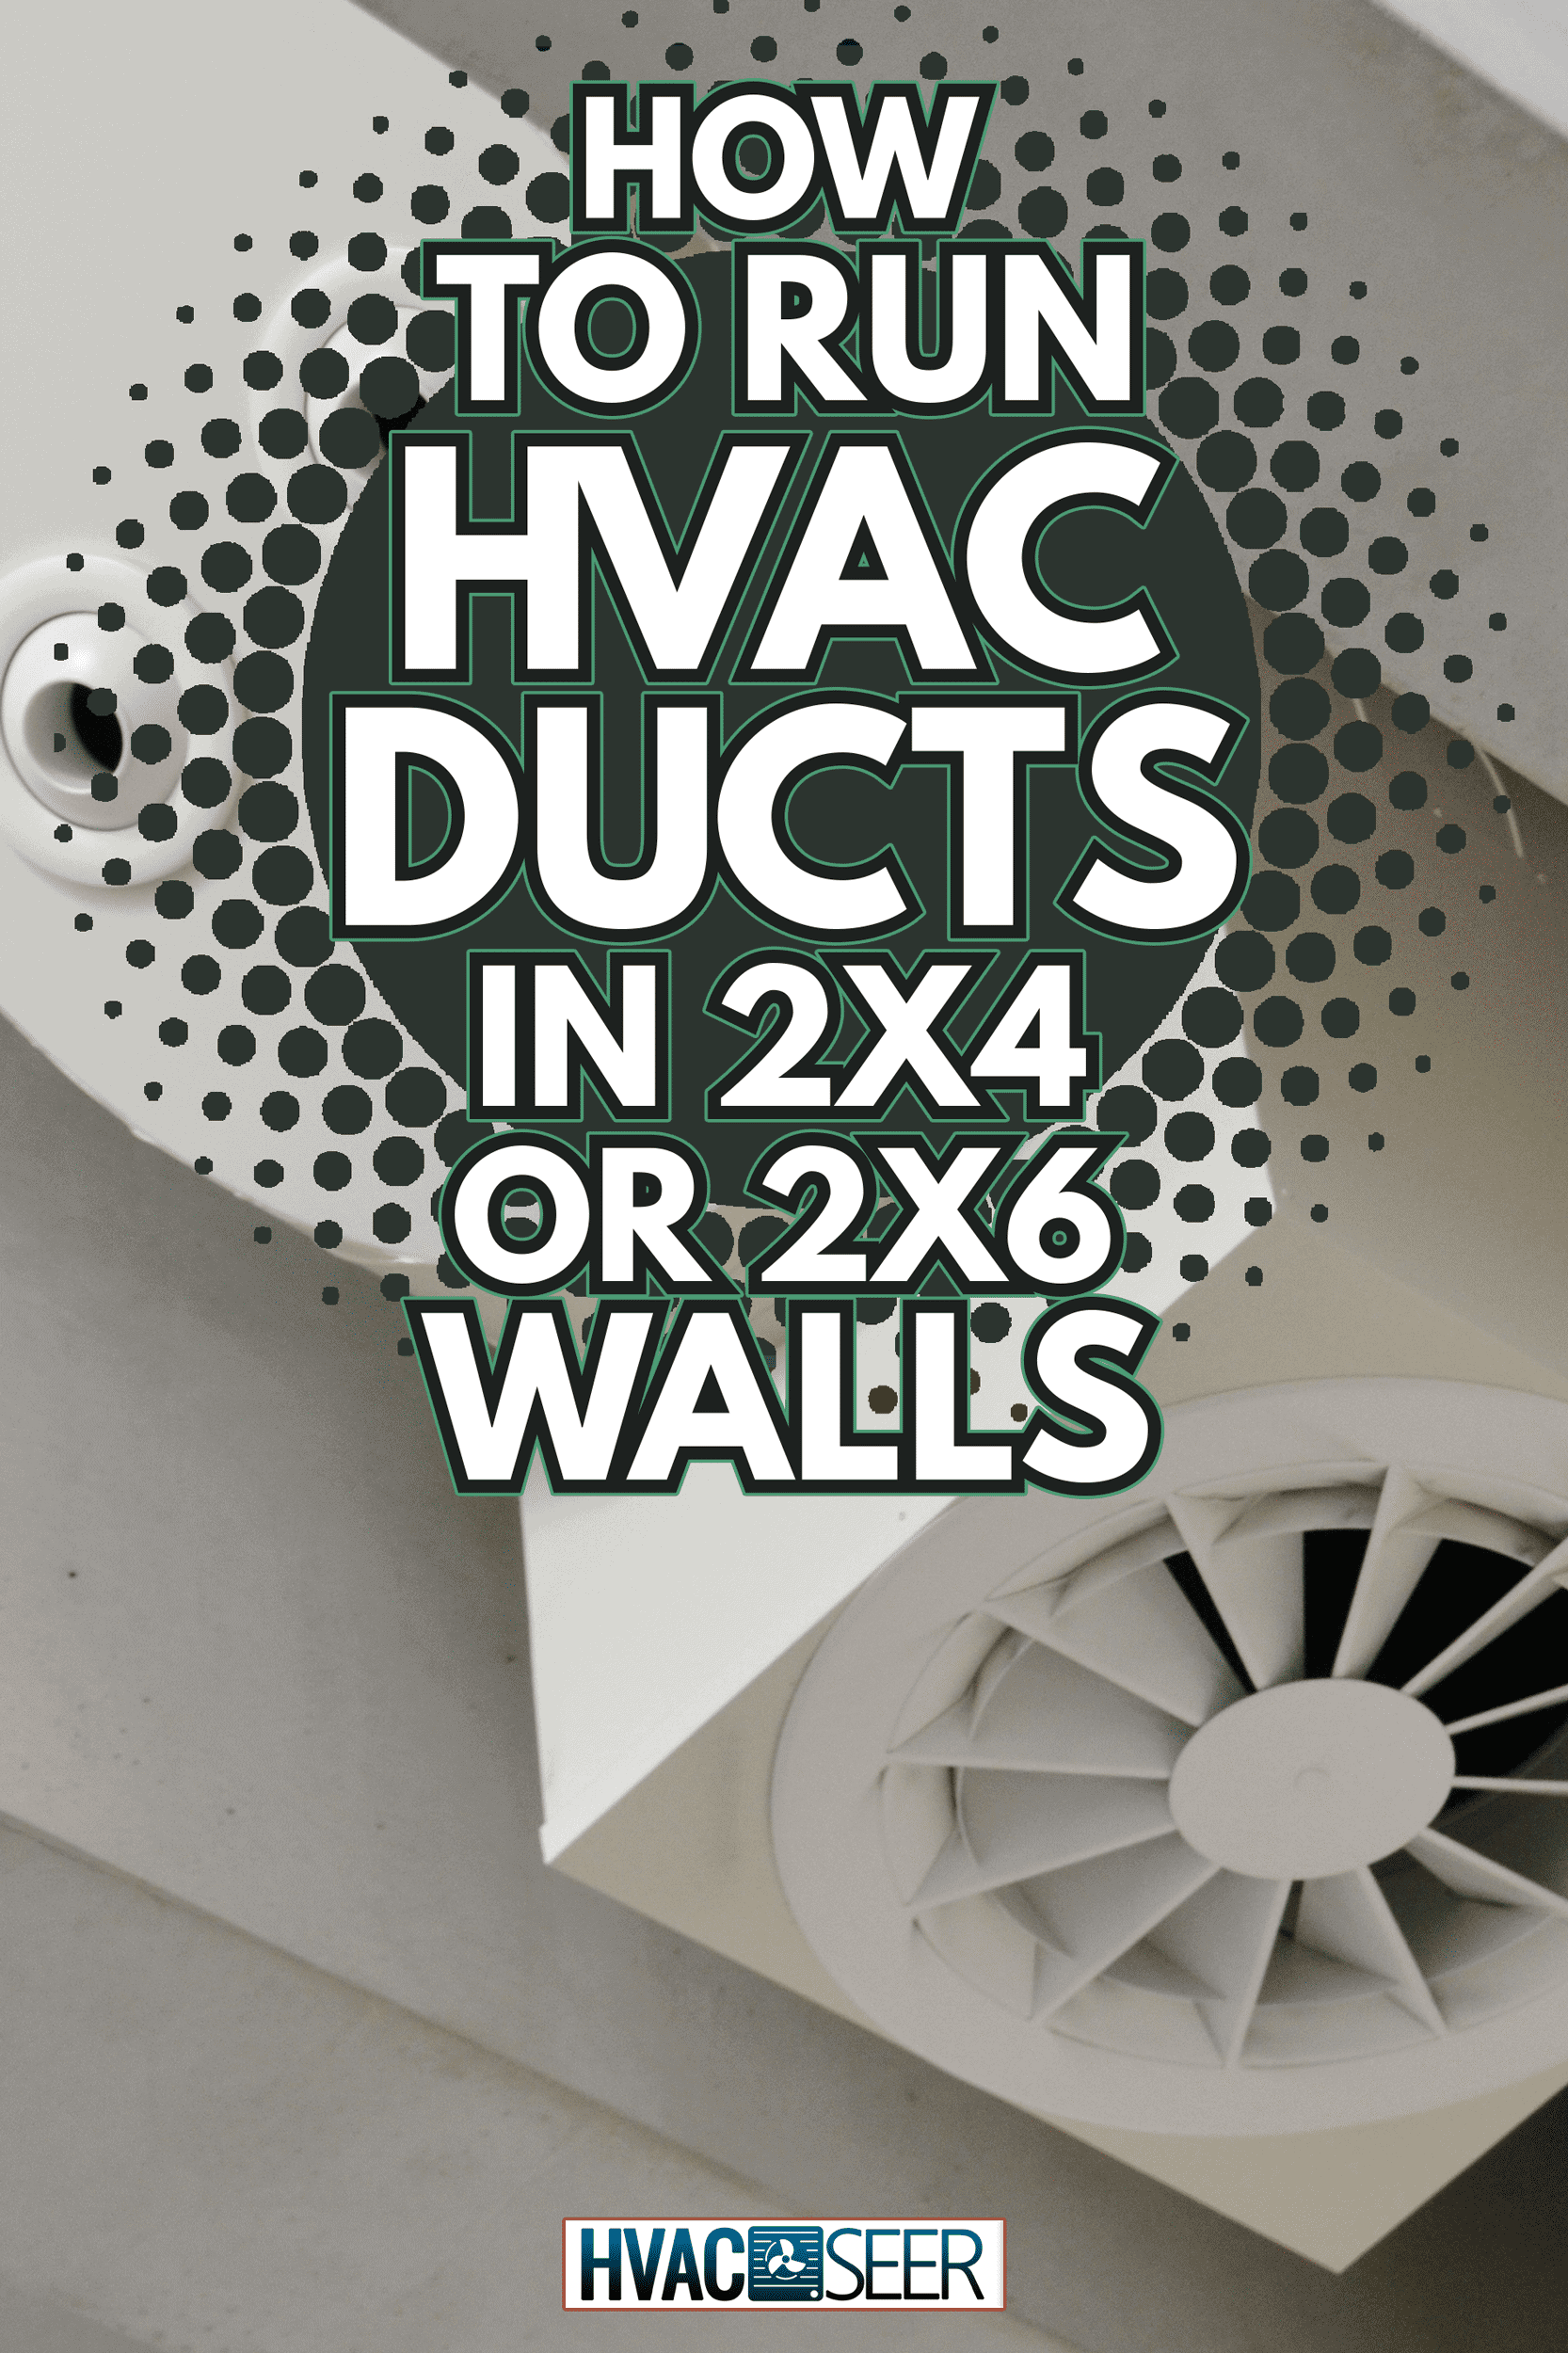 Commercial building air conditioning system with a plenum box, swirl diffuser and two nozzles - How To Run HVAC Ducts In 2X4 Or 2X6 Walls